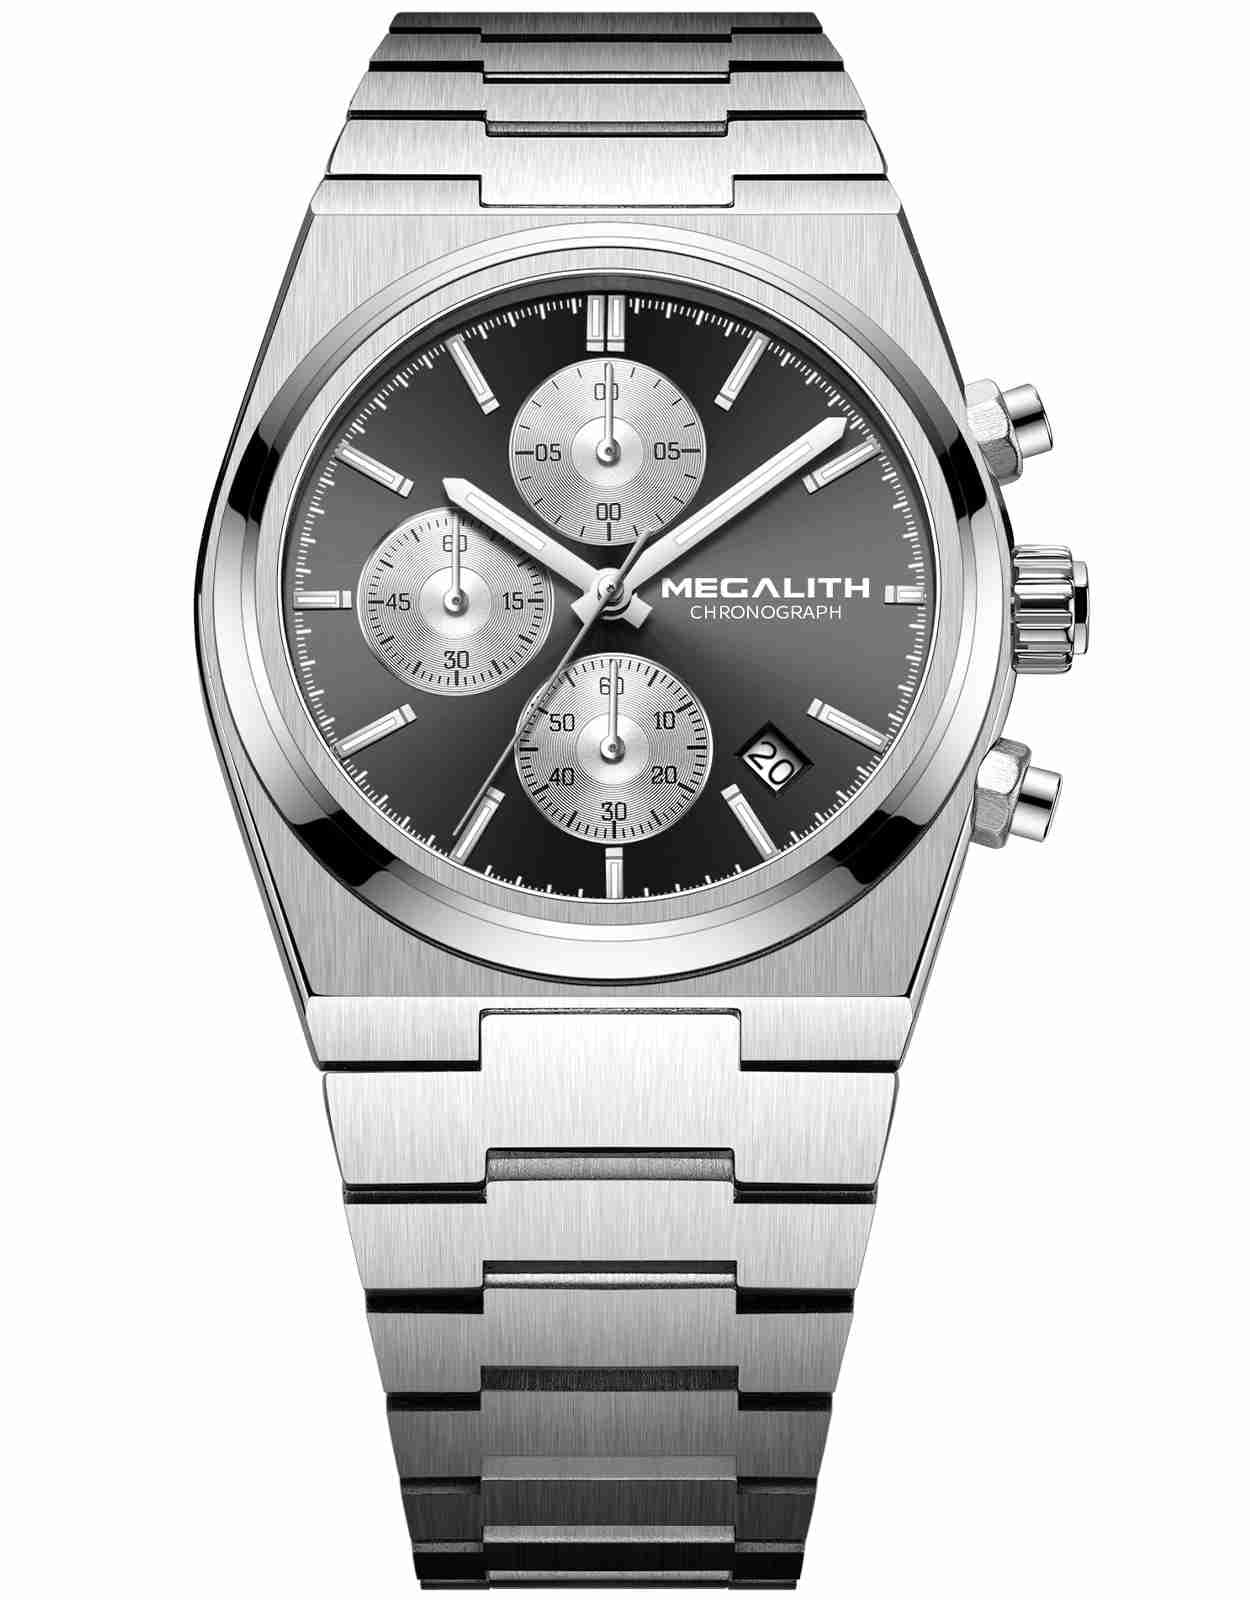 MEGALITH Mens Watches Silver Stainless Steel Chronograph 100M Waterproof Watch for Swimming Diving Analog Quartz Mens Wrist